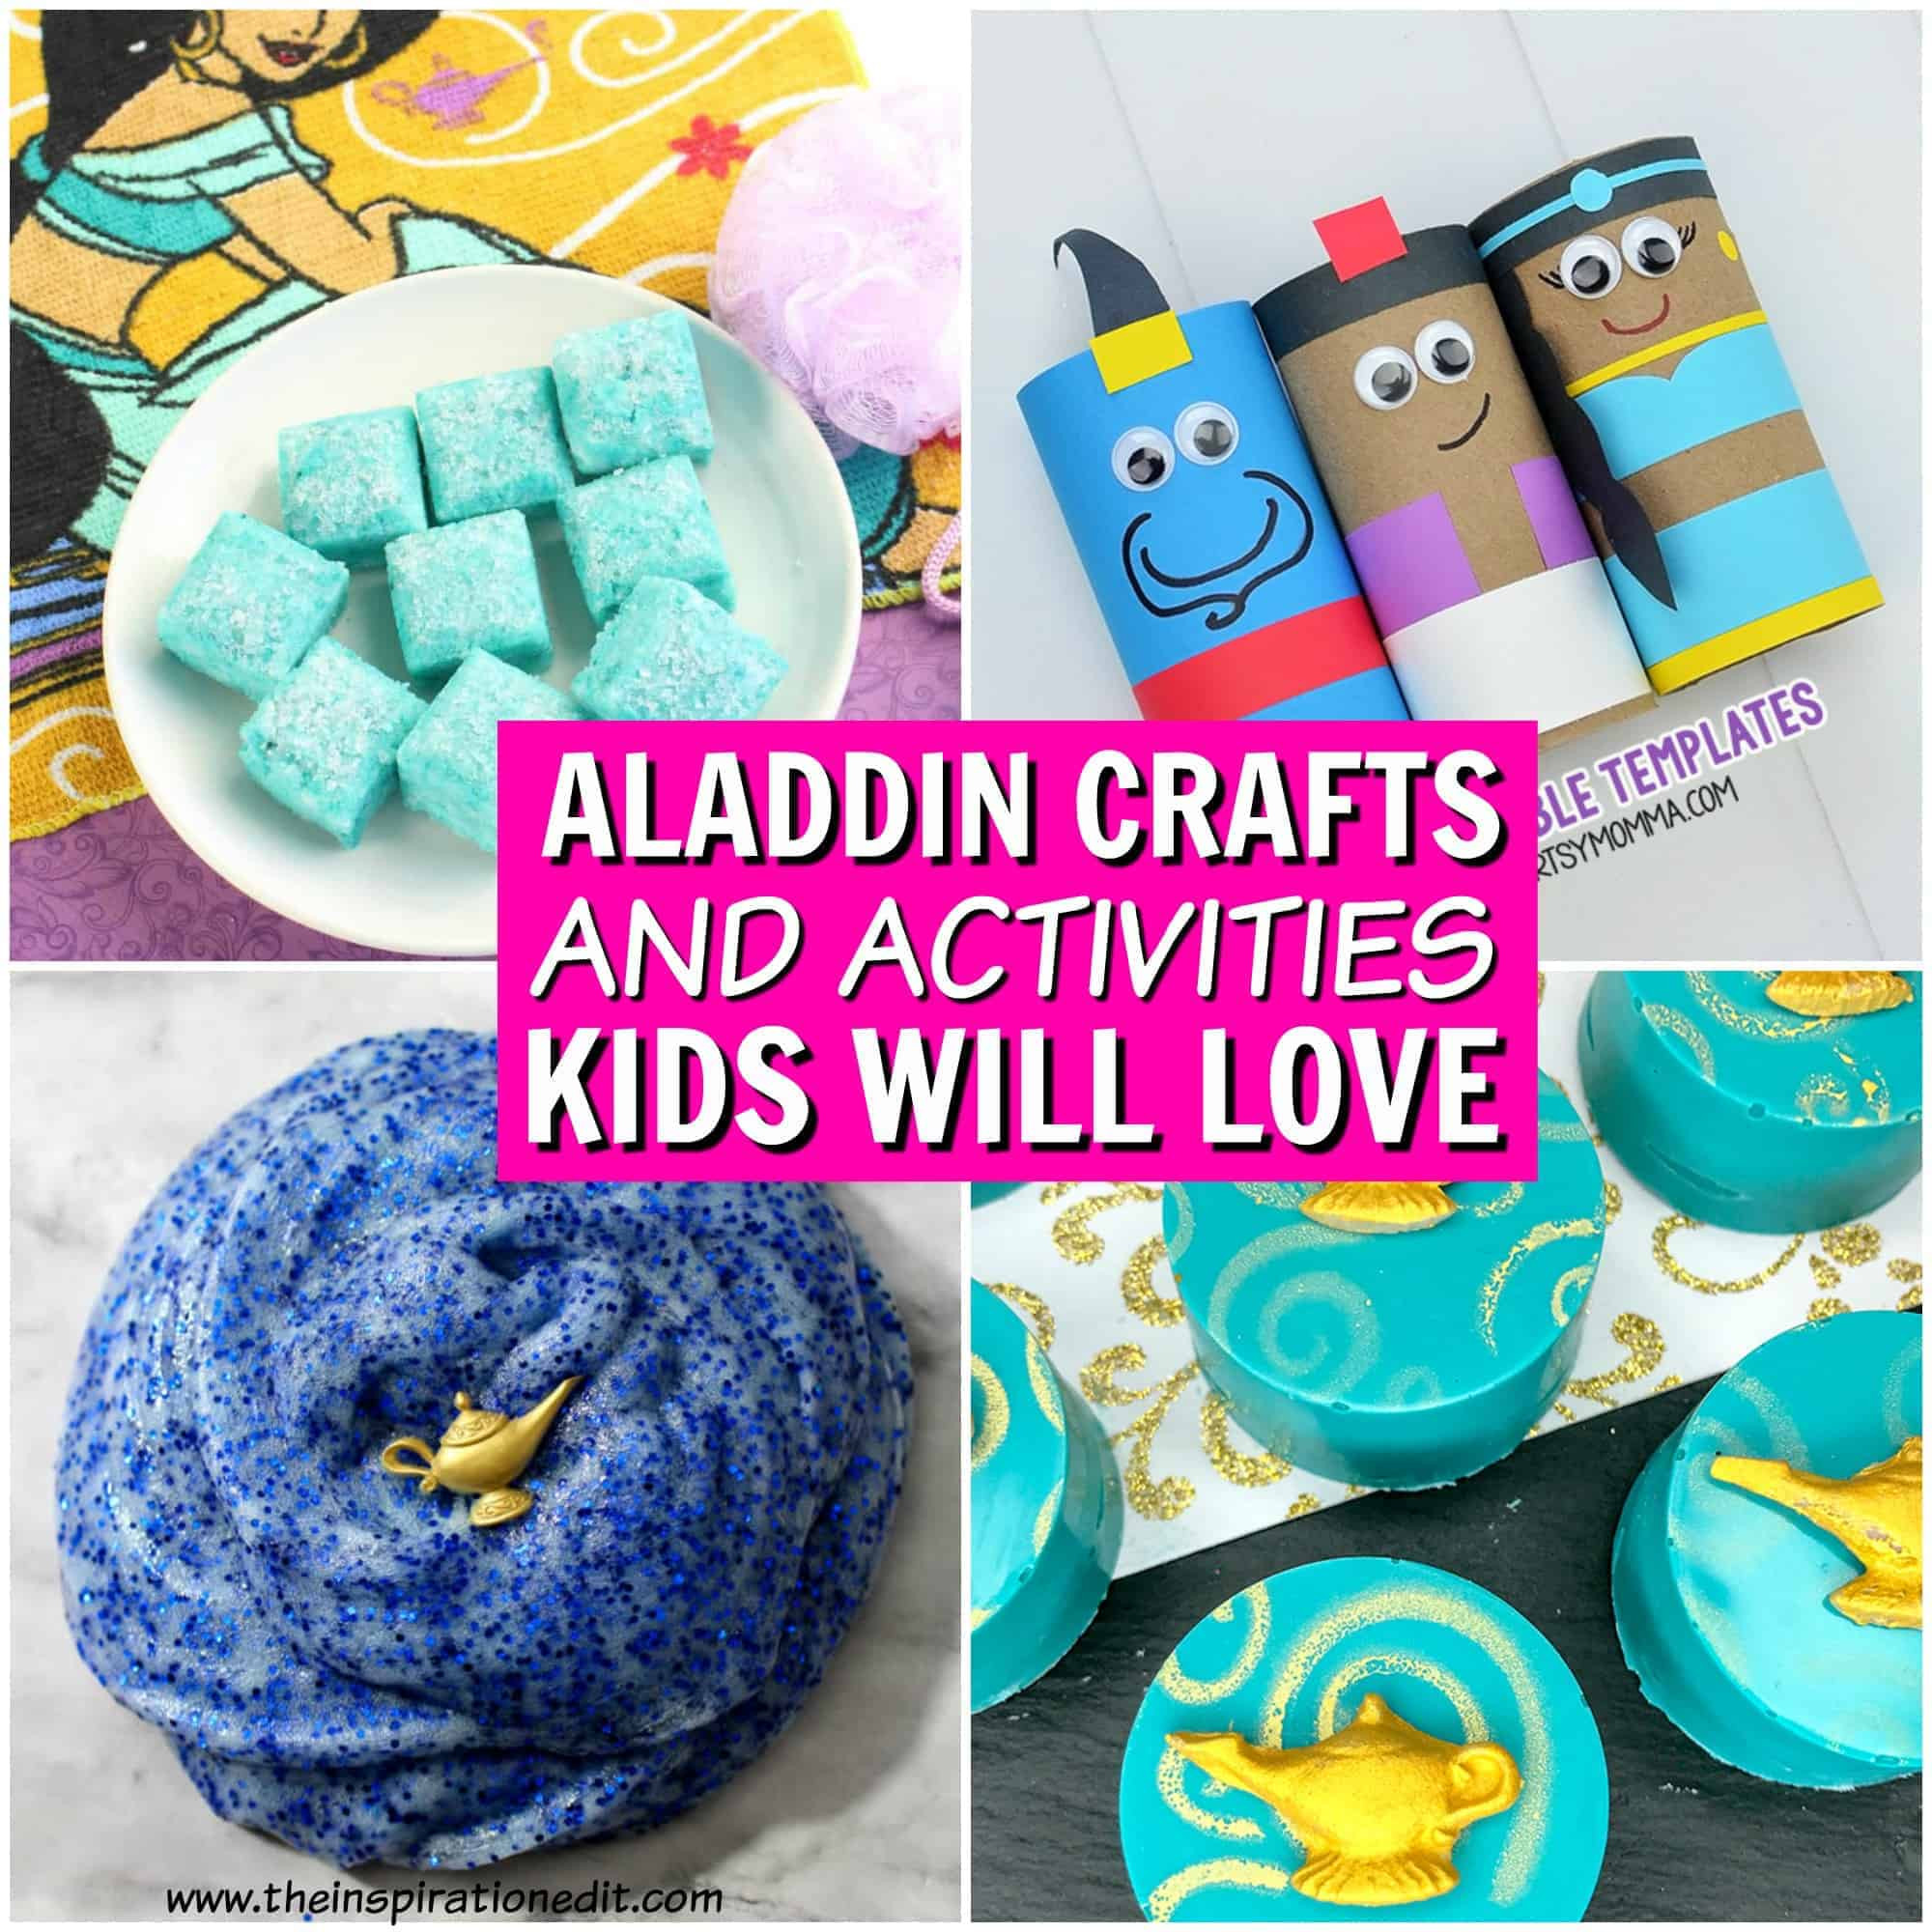 Arts &amp; Crafts For Kids
 Aladdin Arts And Crafts Kids Will Love · The Inspiration Edit